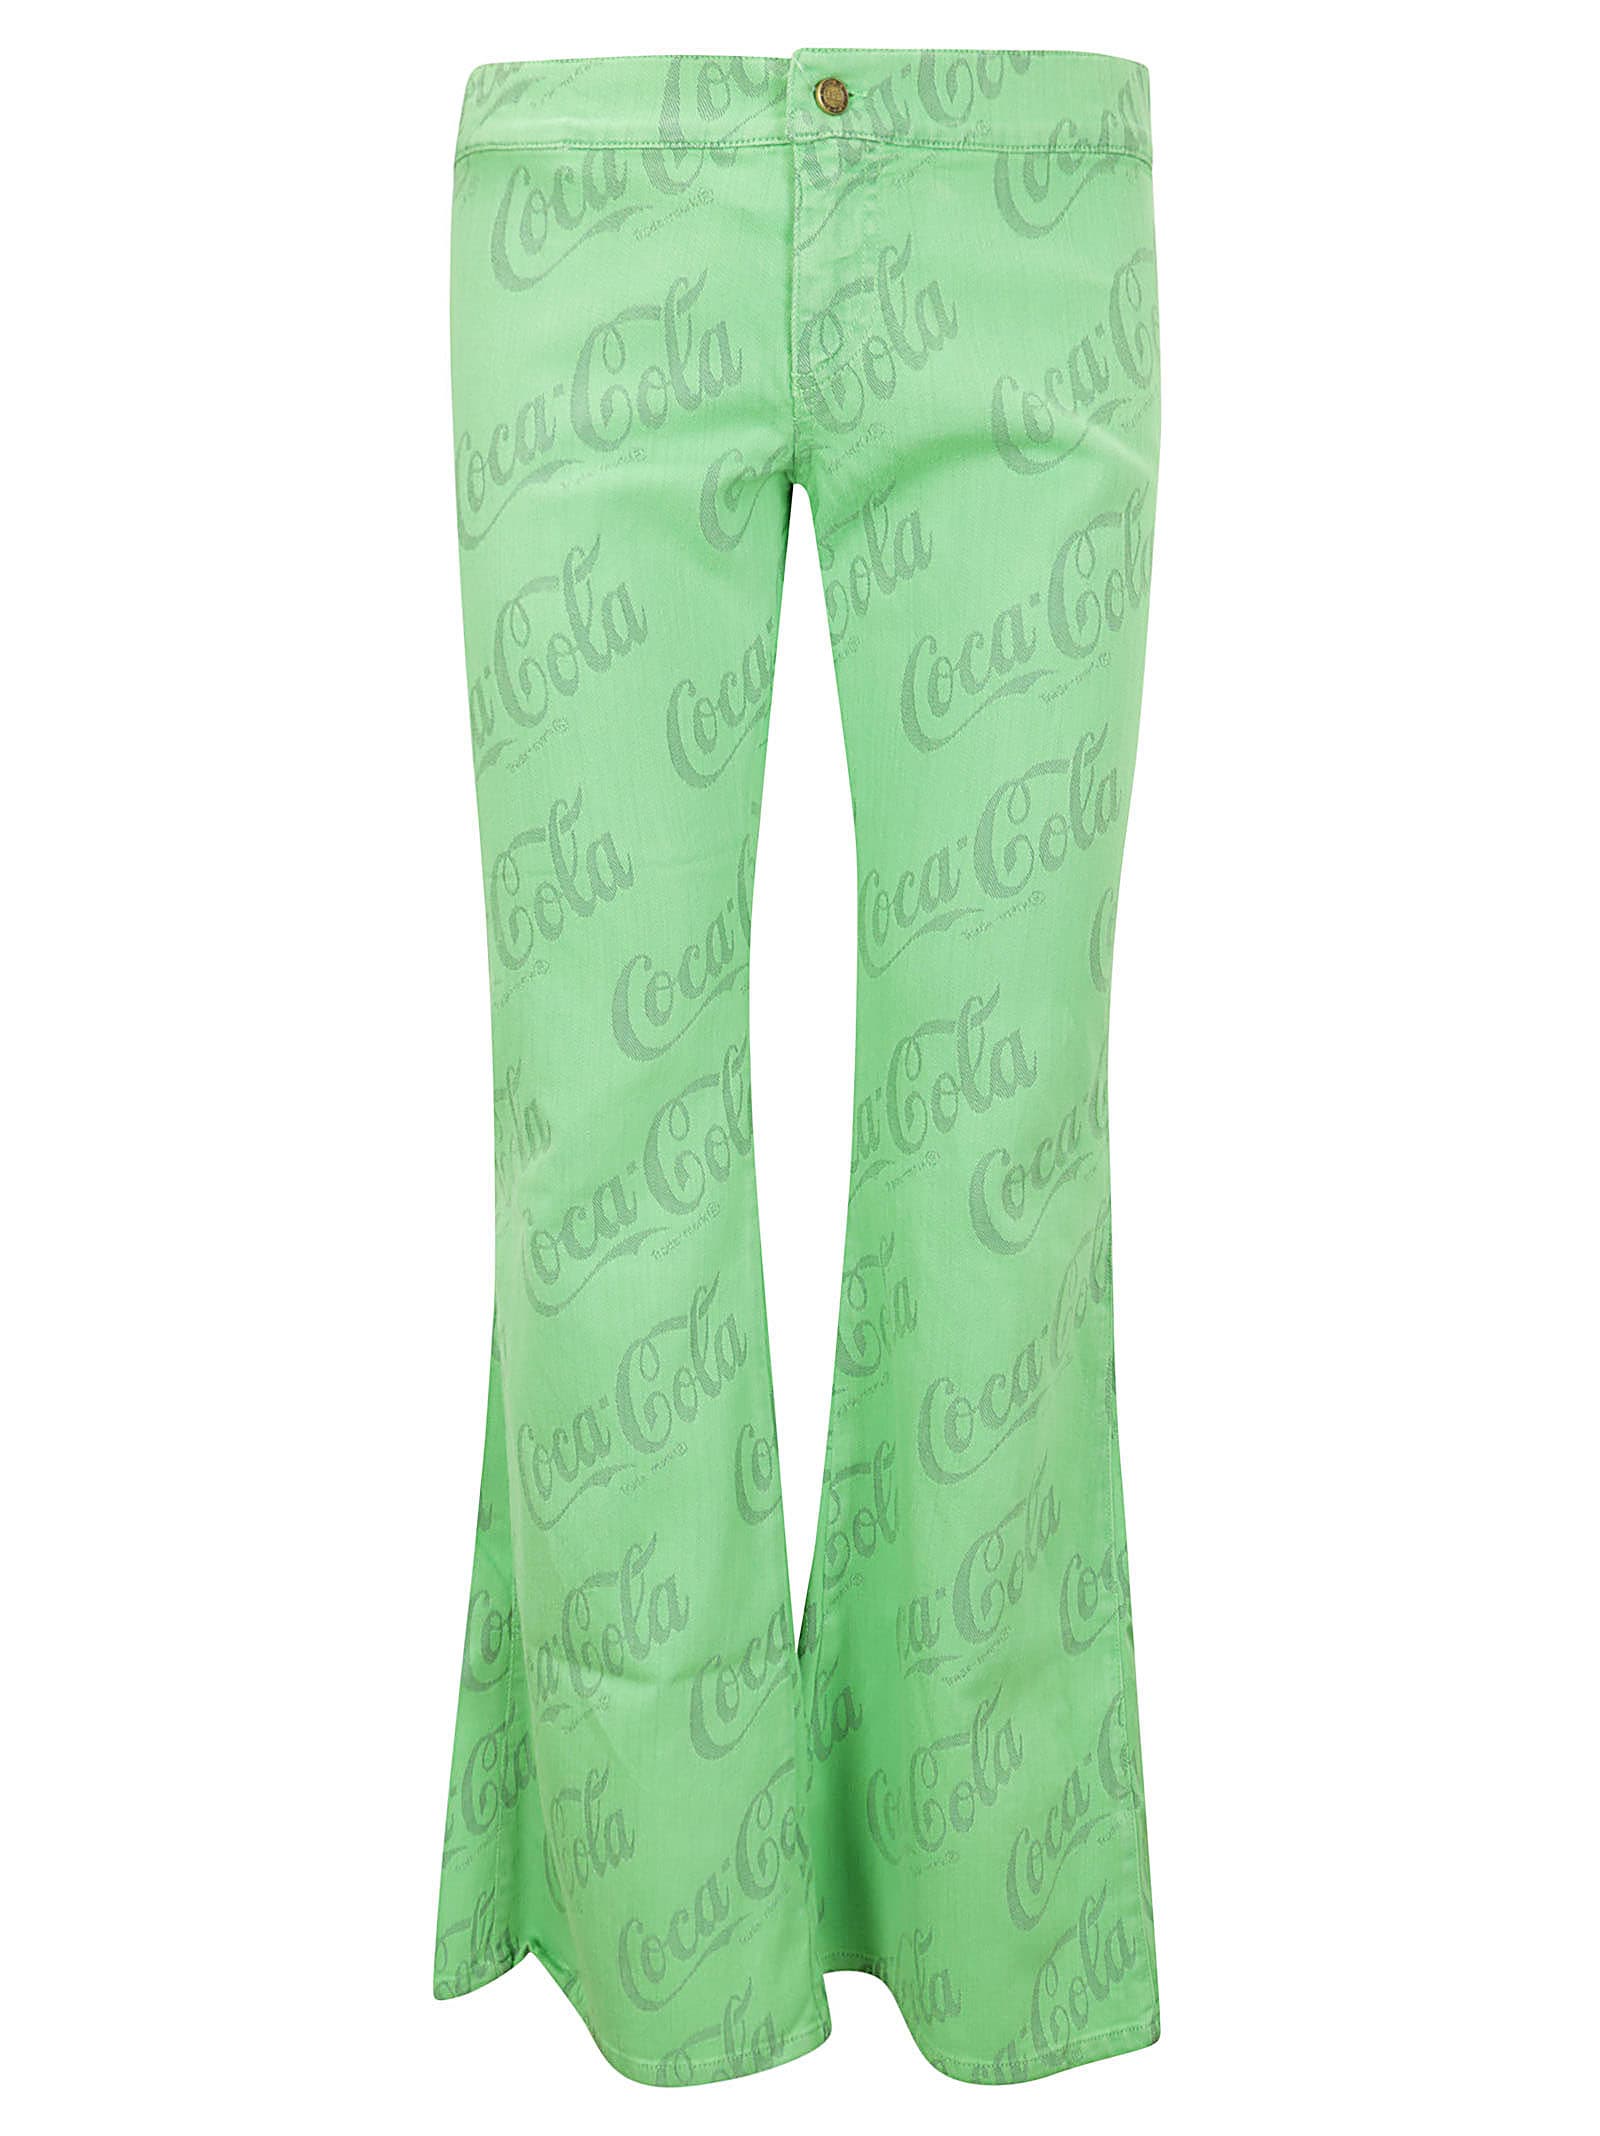 Erl Unisex Jacquard Denim Flare Pants Woven In Green Coca Cola